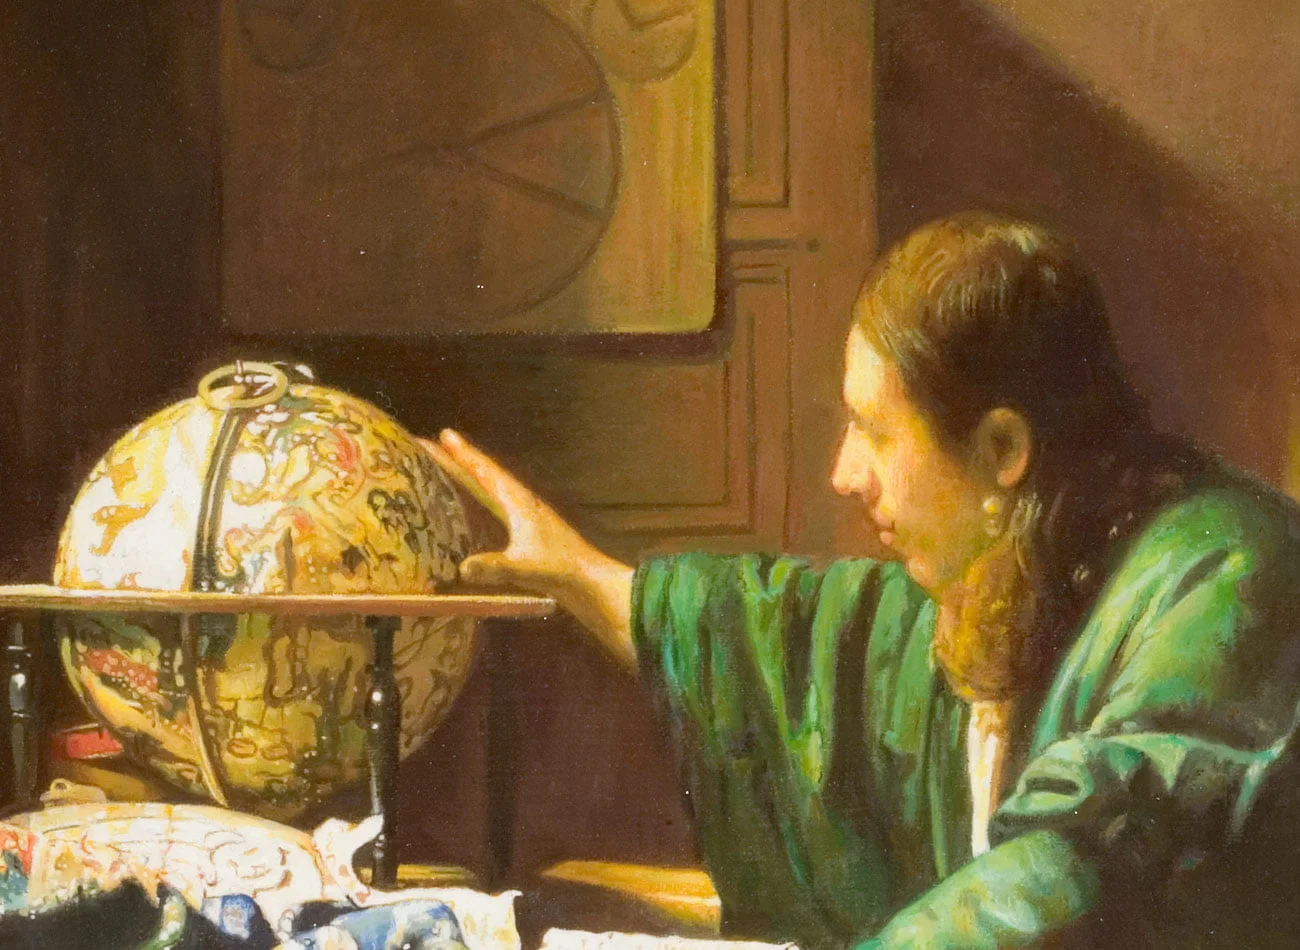 The astronomer detail